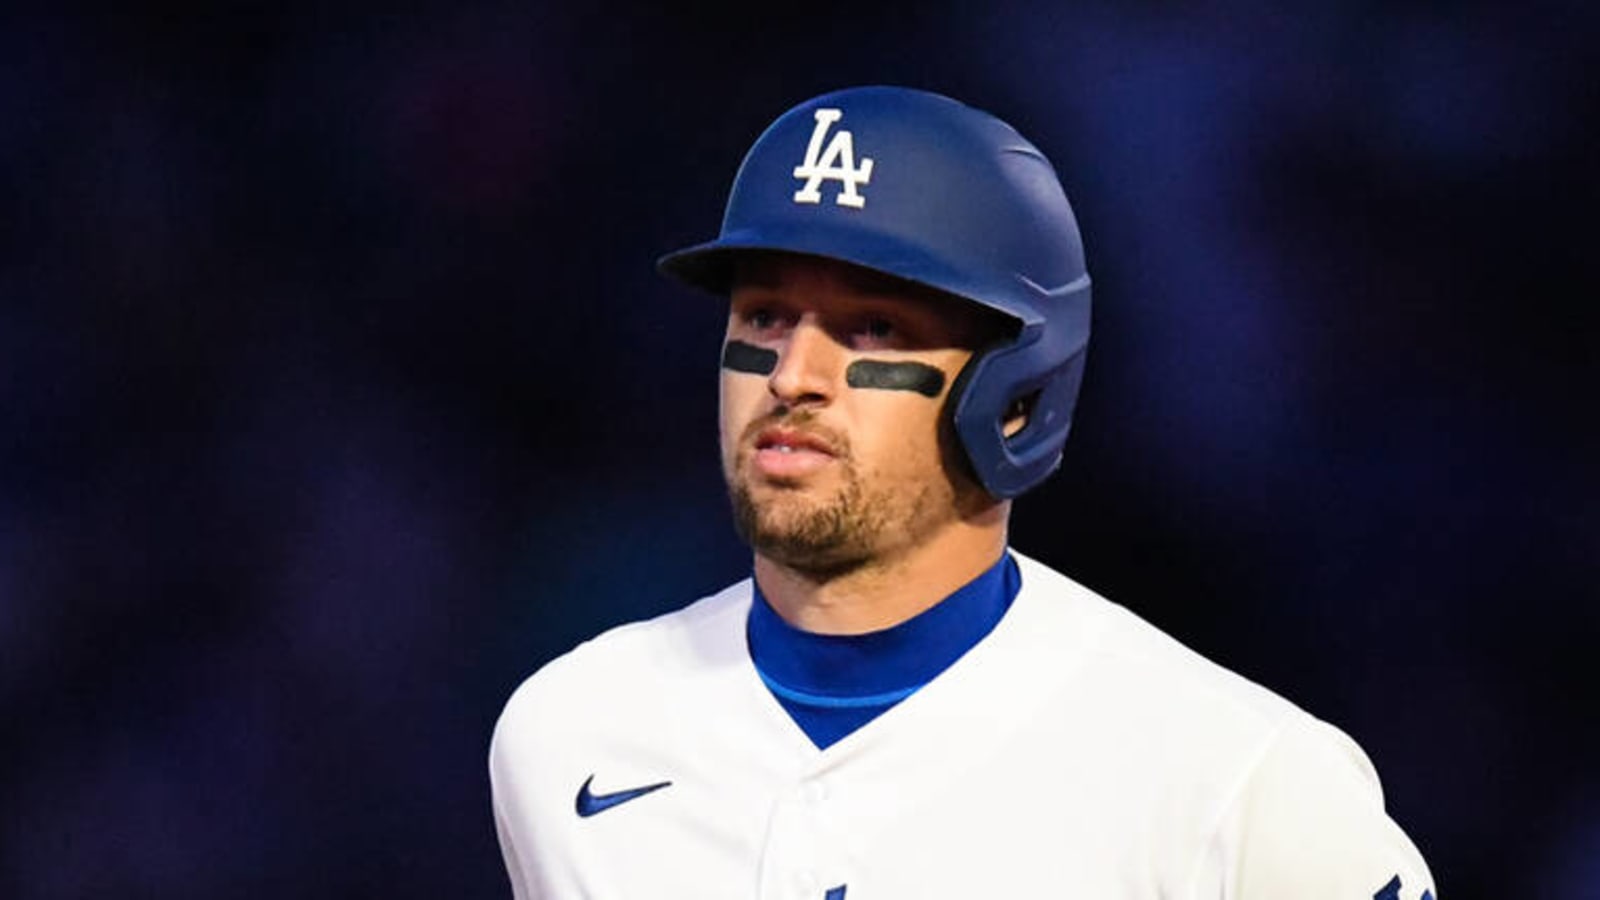 Thompson blasts three HRs in Dodgers victory